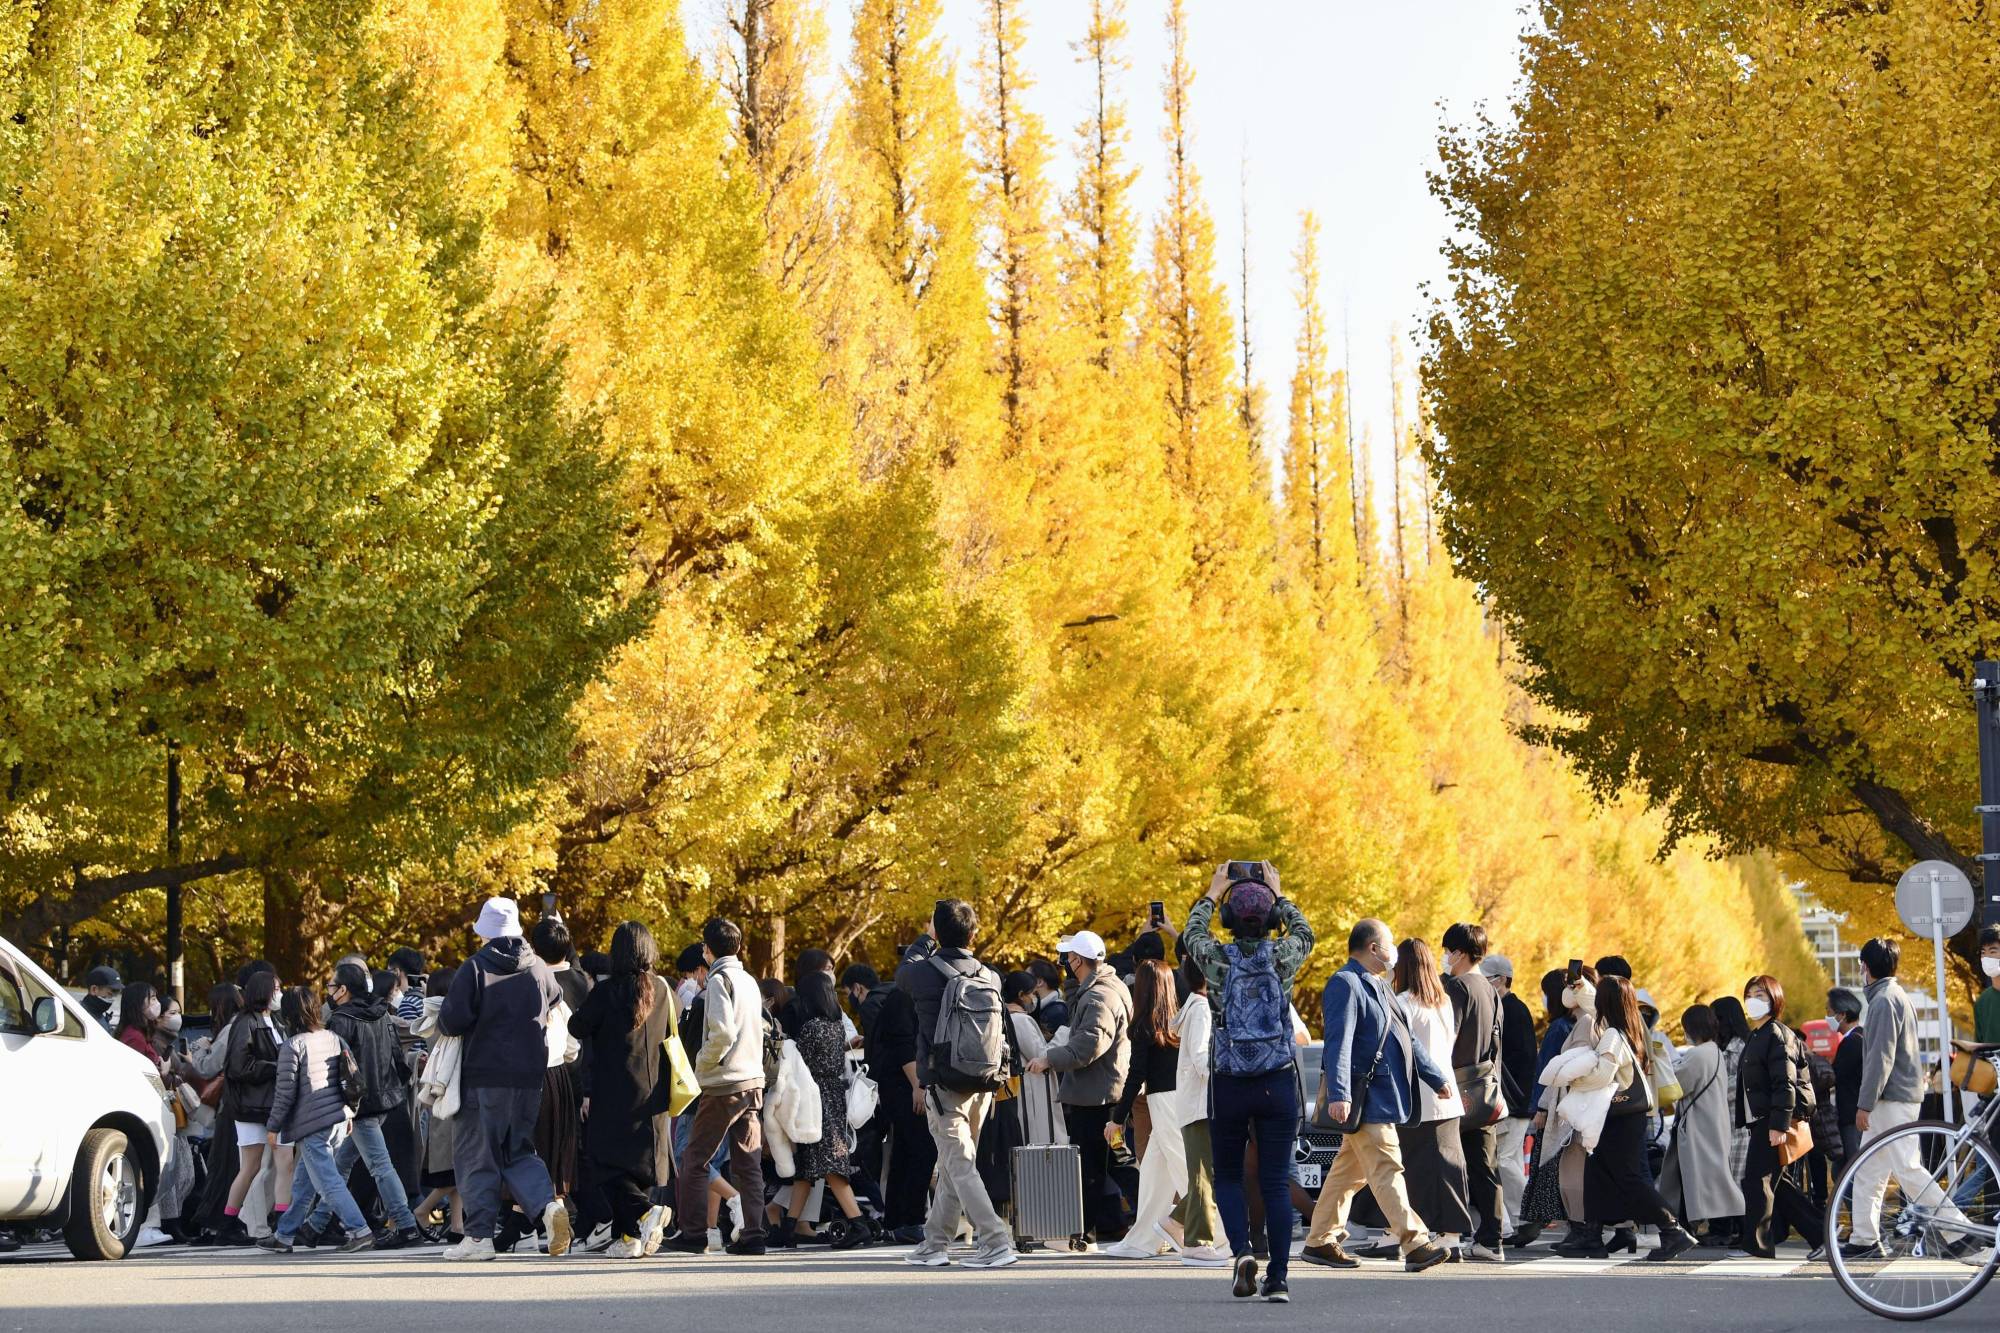 One of the big draws of Tokyo's Meiji Jingu Gaien park is its avenue of gingko trees, which attract visitors in autumn. | KYODO